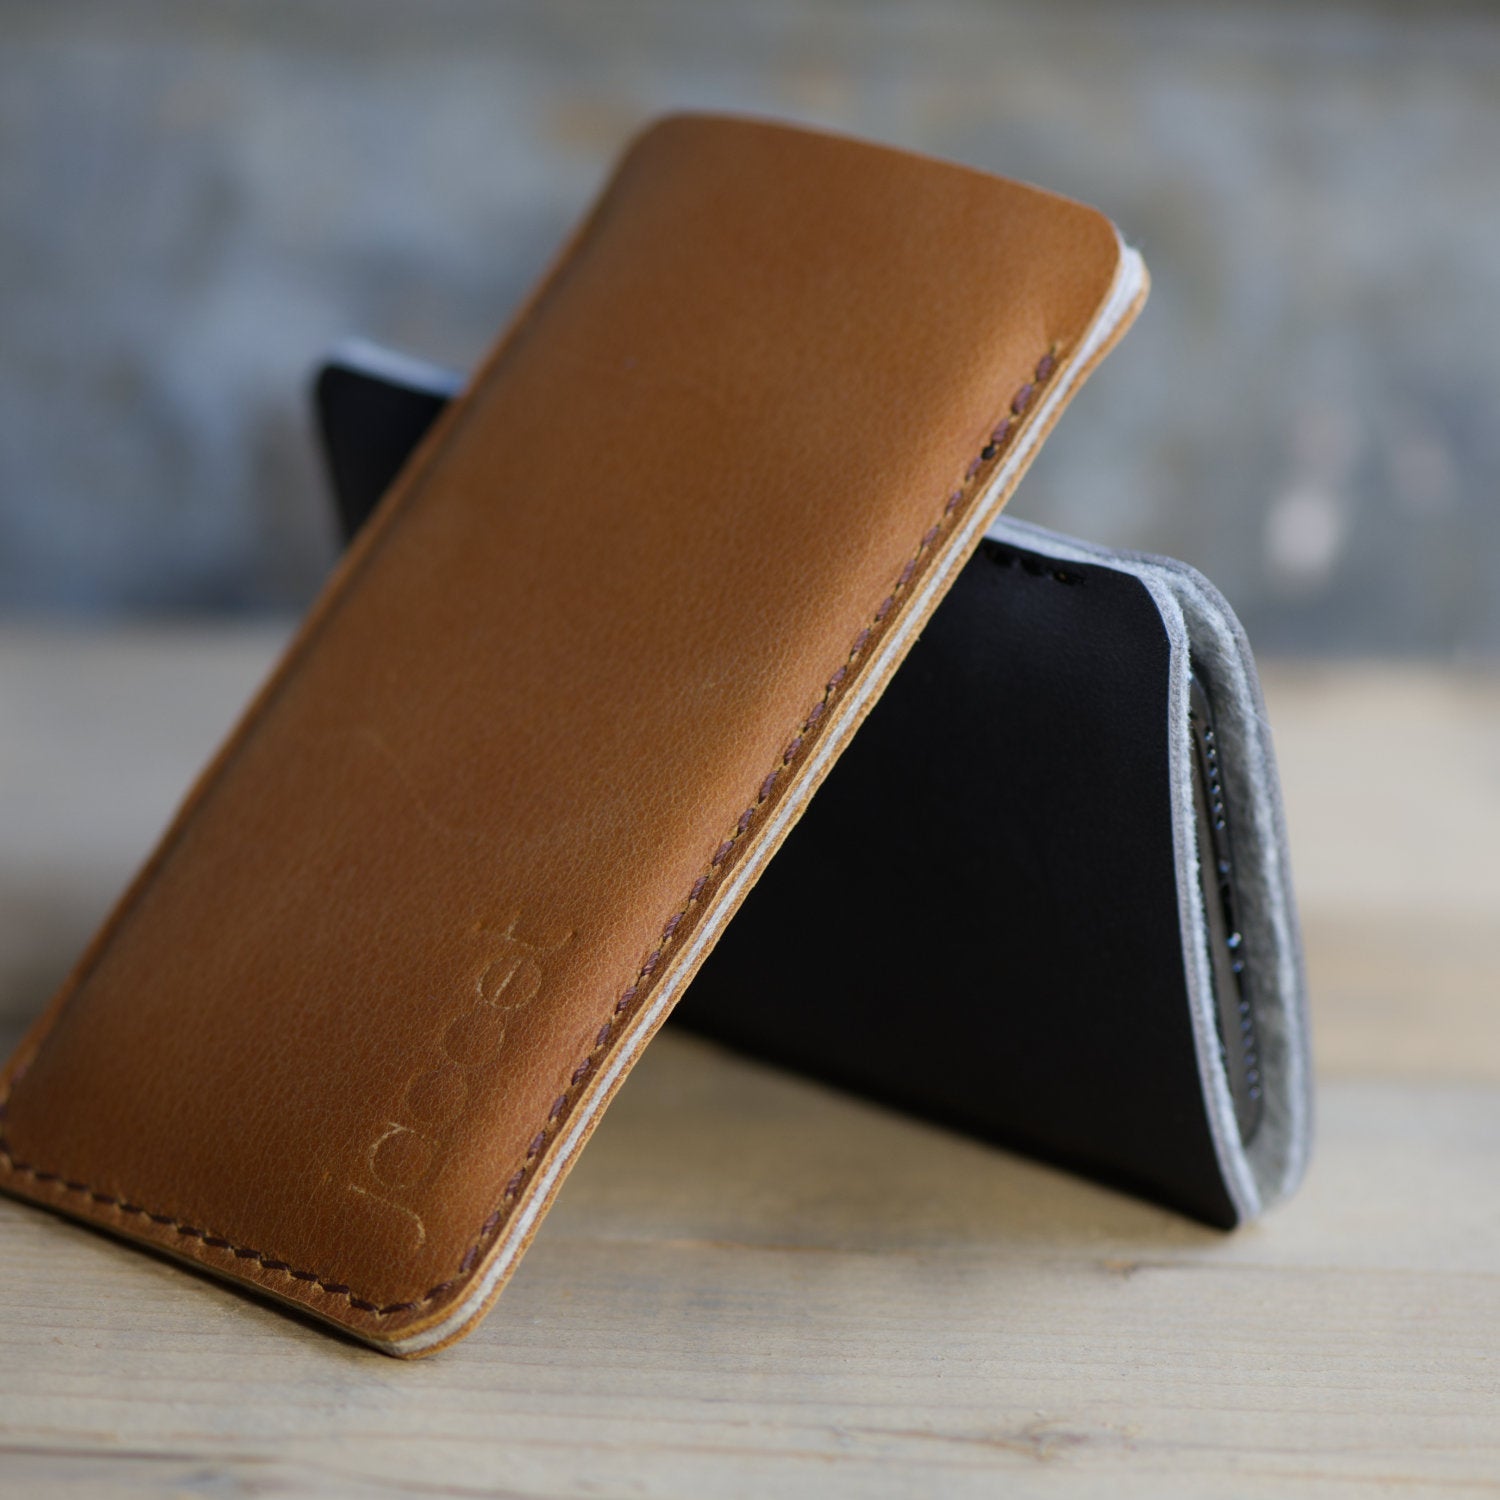 JACCET leather Sony Xperia sleeve - Cognac color leather with brown wool felt - 100% Handmade